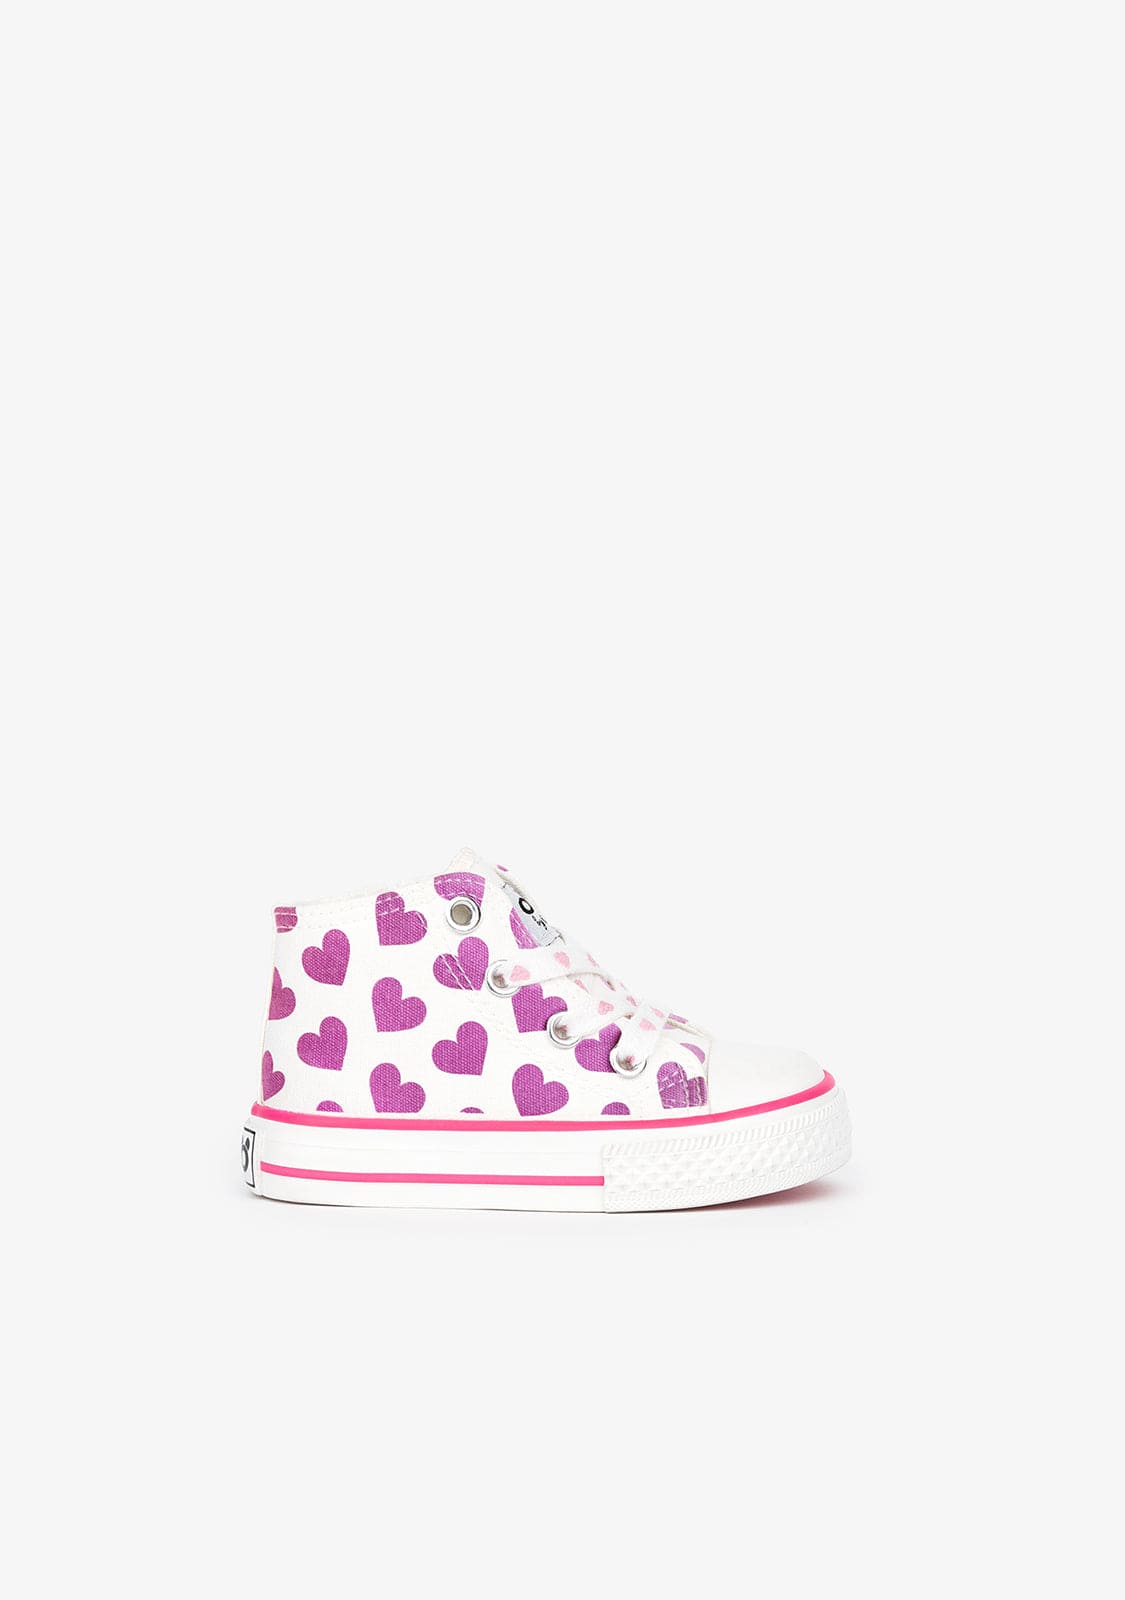 OSITO Shoes Baby's White Sunlight Hi-Top Sneaker